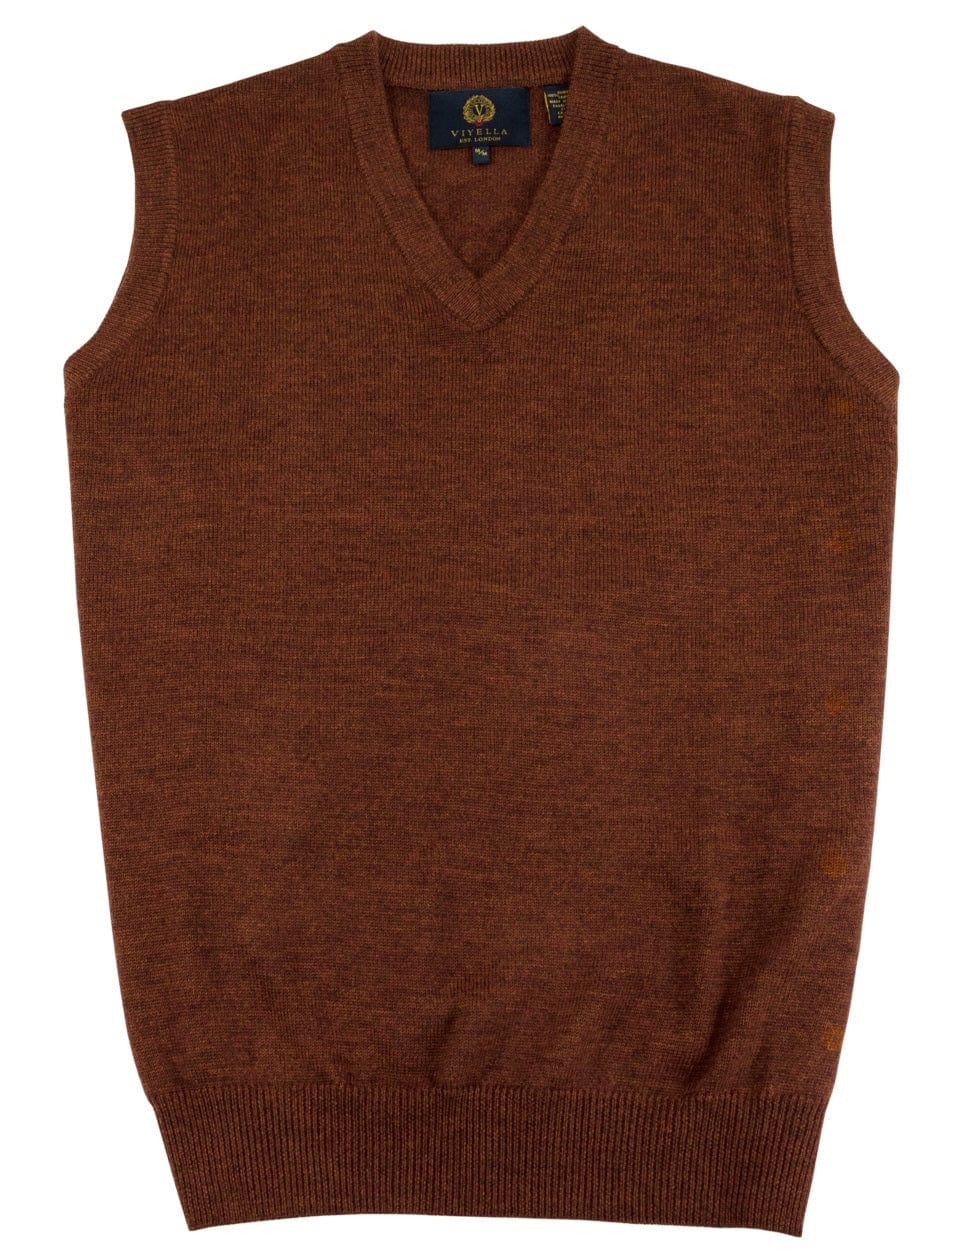 Viyella SALE on our Extra Fine Merino Wool V-Neck Pull Over Sweater Vest